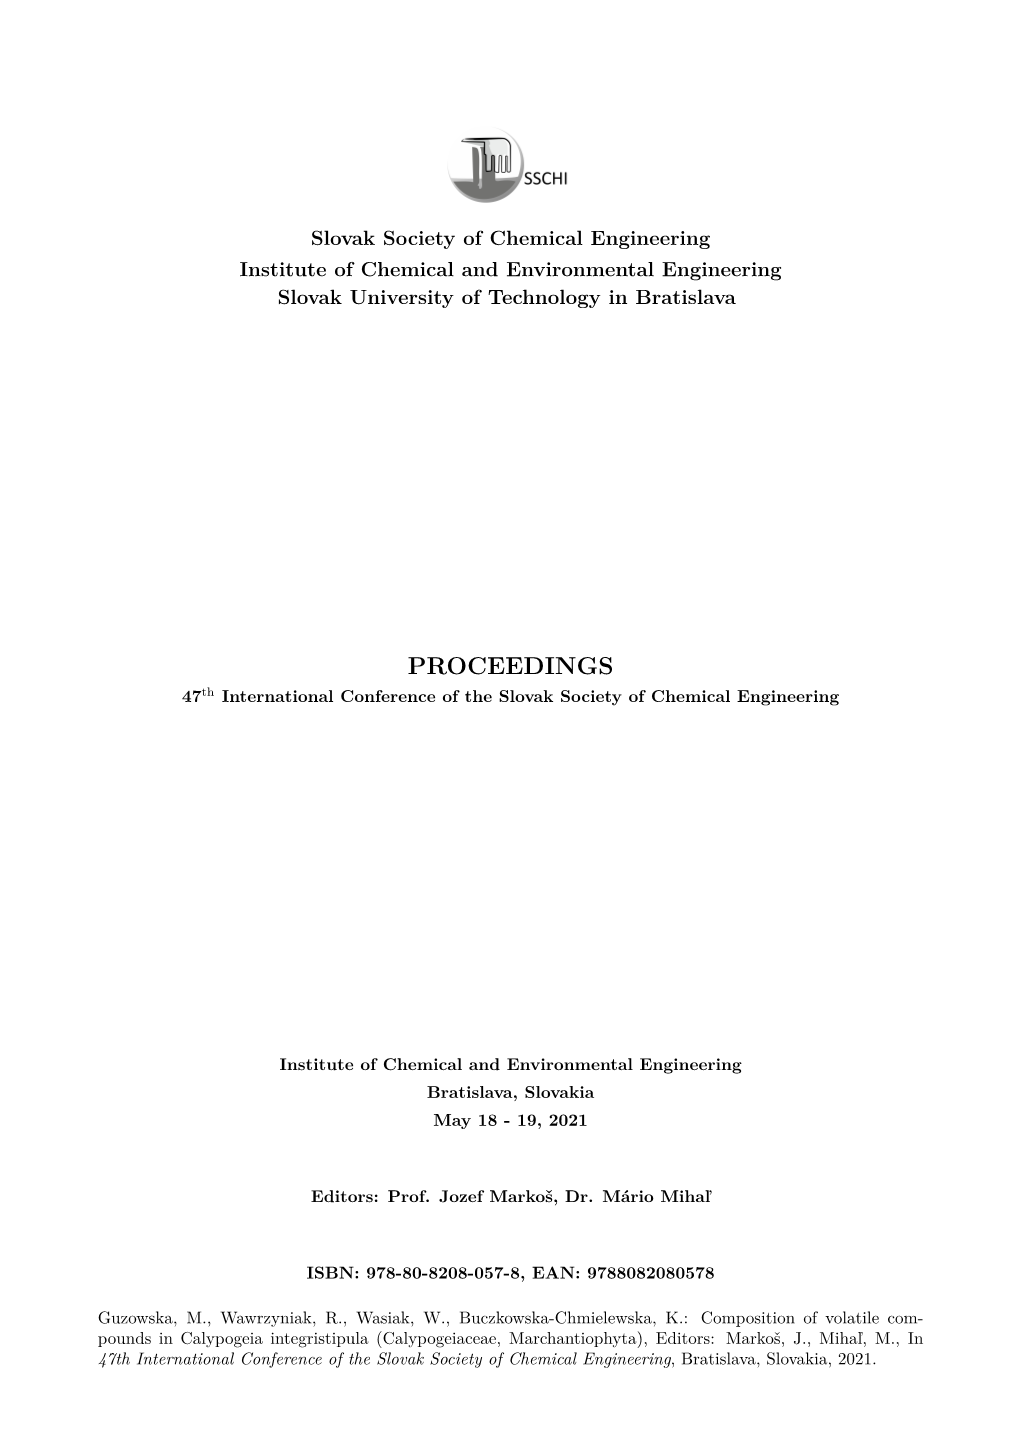 PROCEEDINGS 47Th International Conference of the Slovak Society of Chemical Engineering